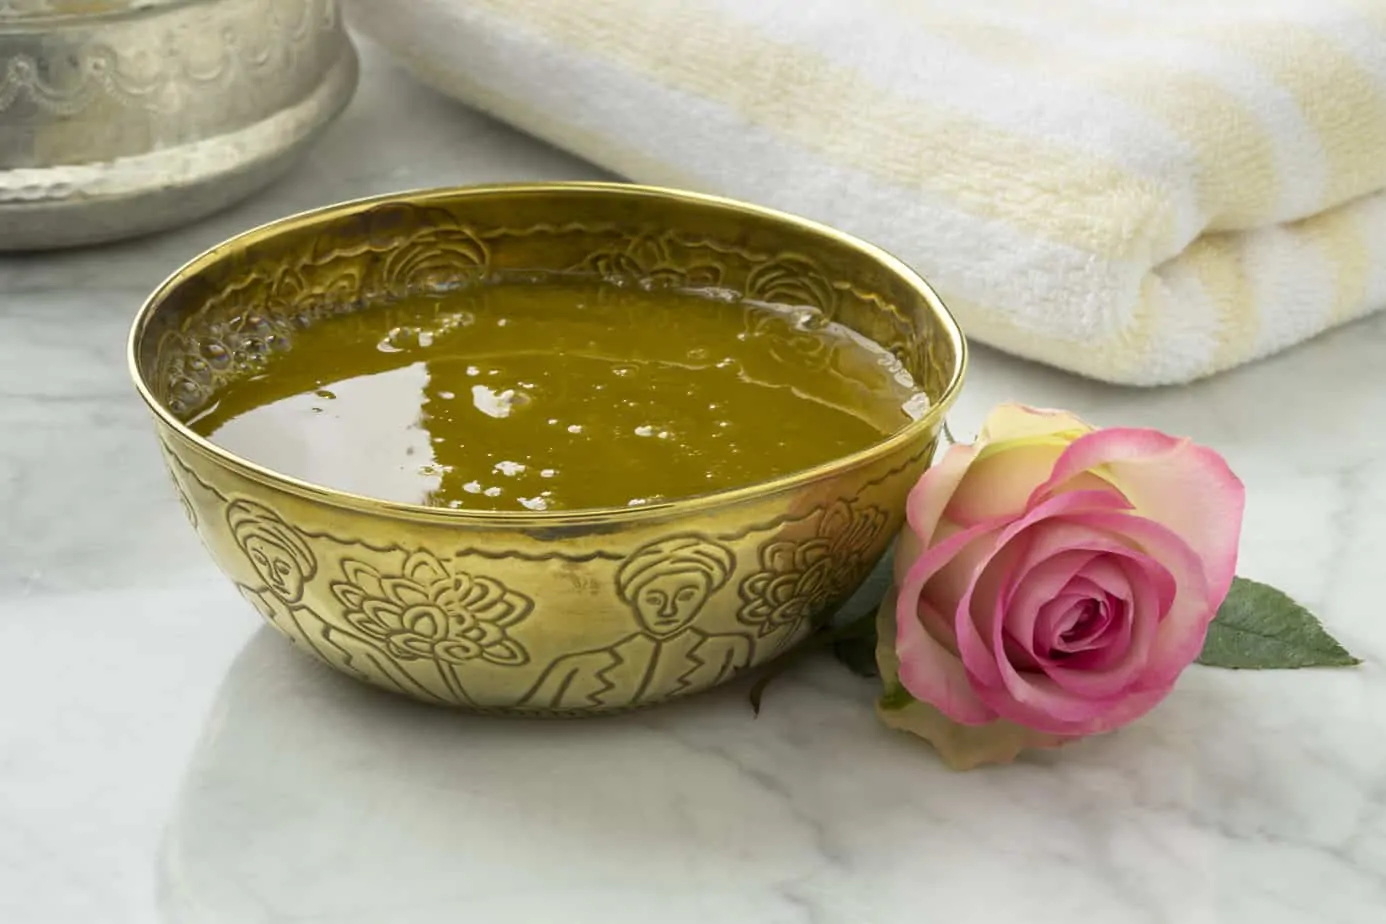 High phenolic olive oil with rose extract for skin care.